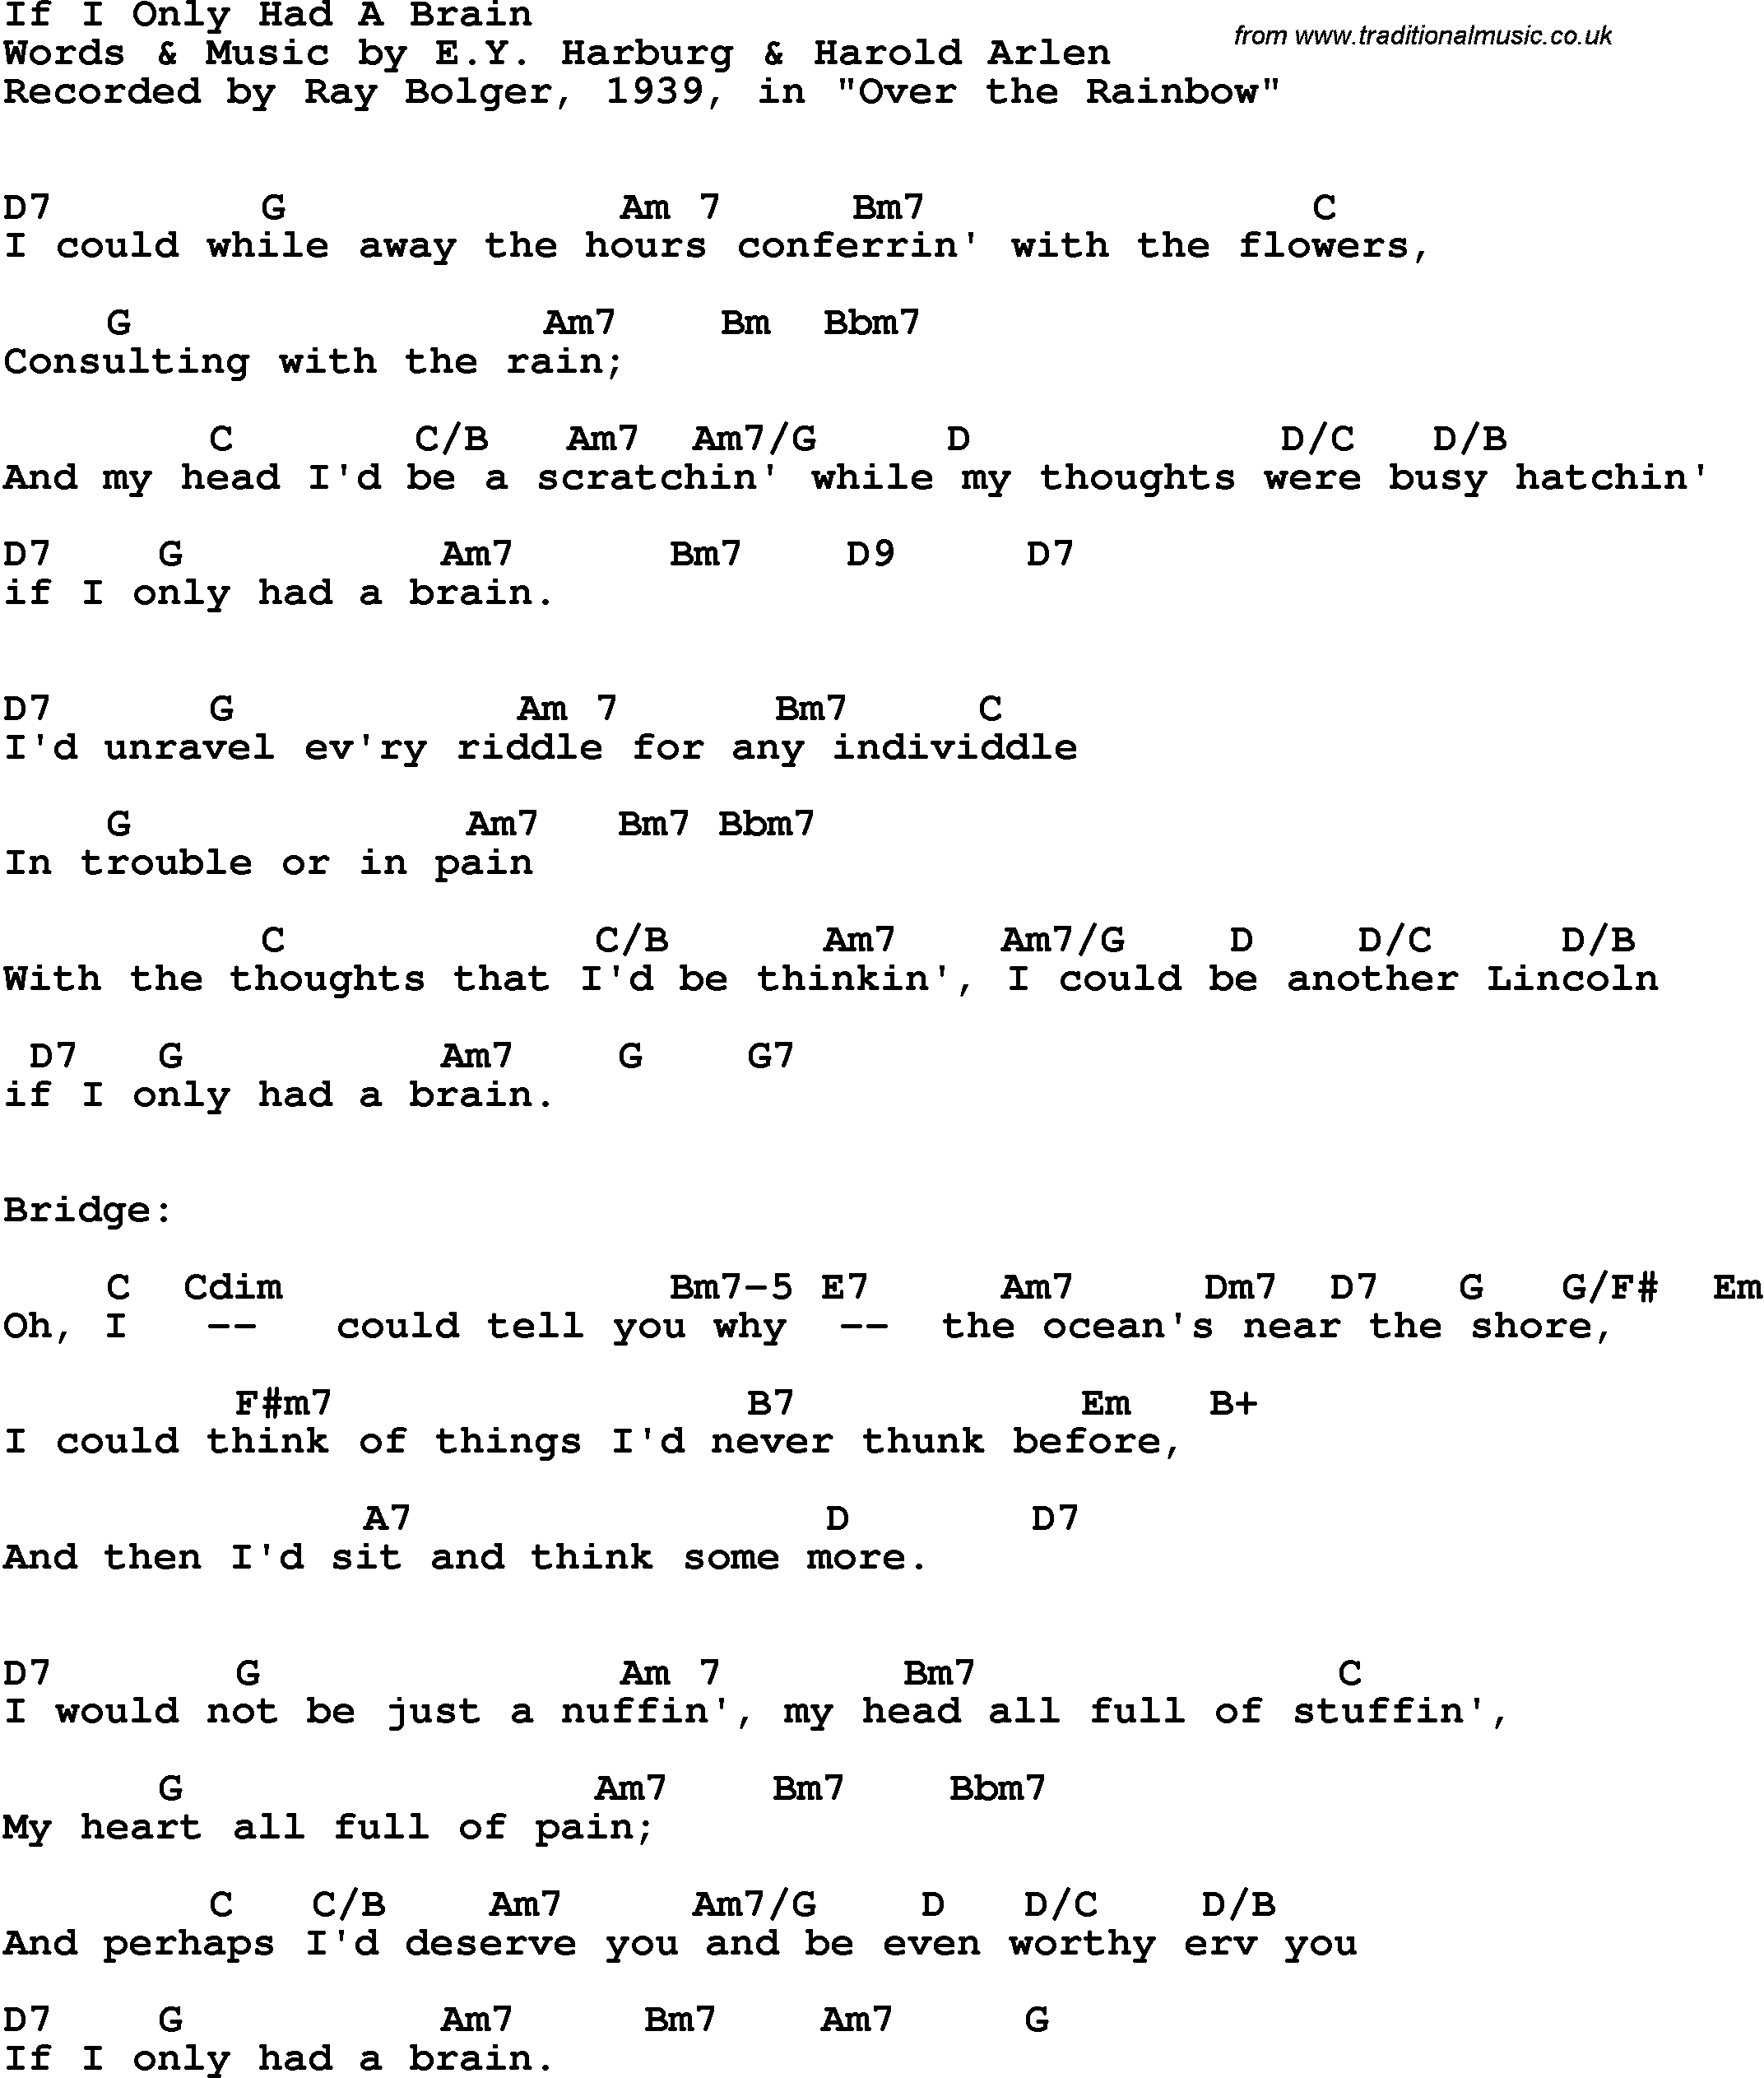 Song Lyrics with guitar chords for If I Only Had A Brain - Ray Bolger, 1939